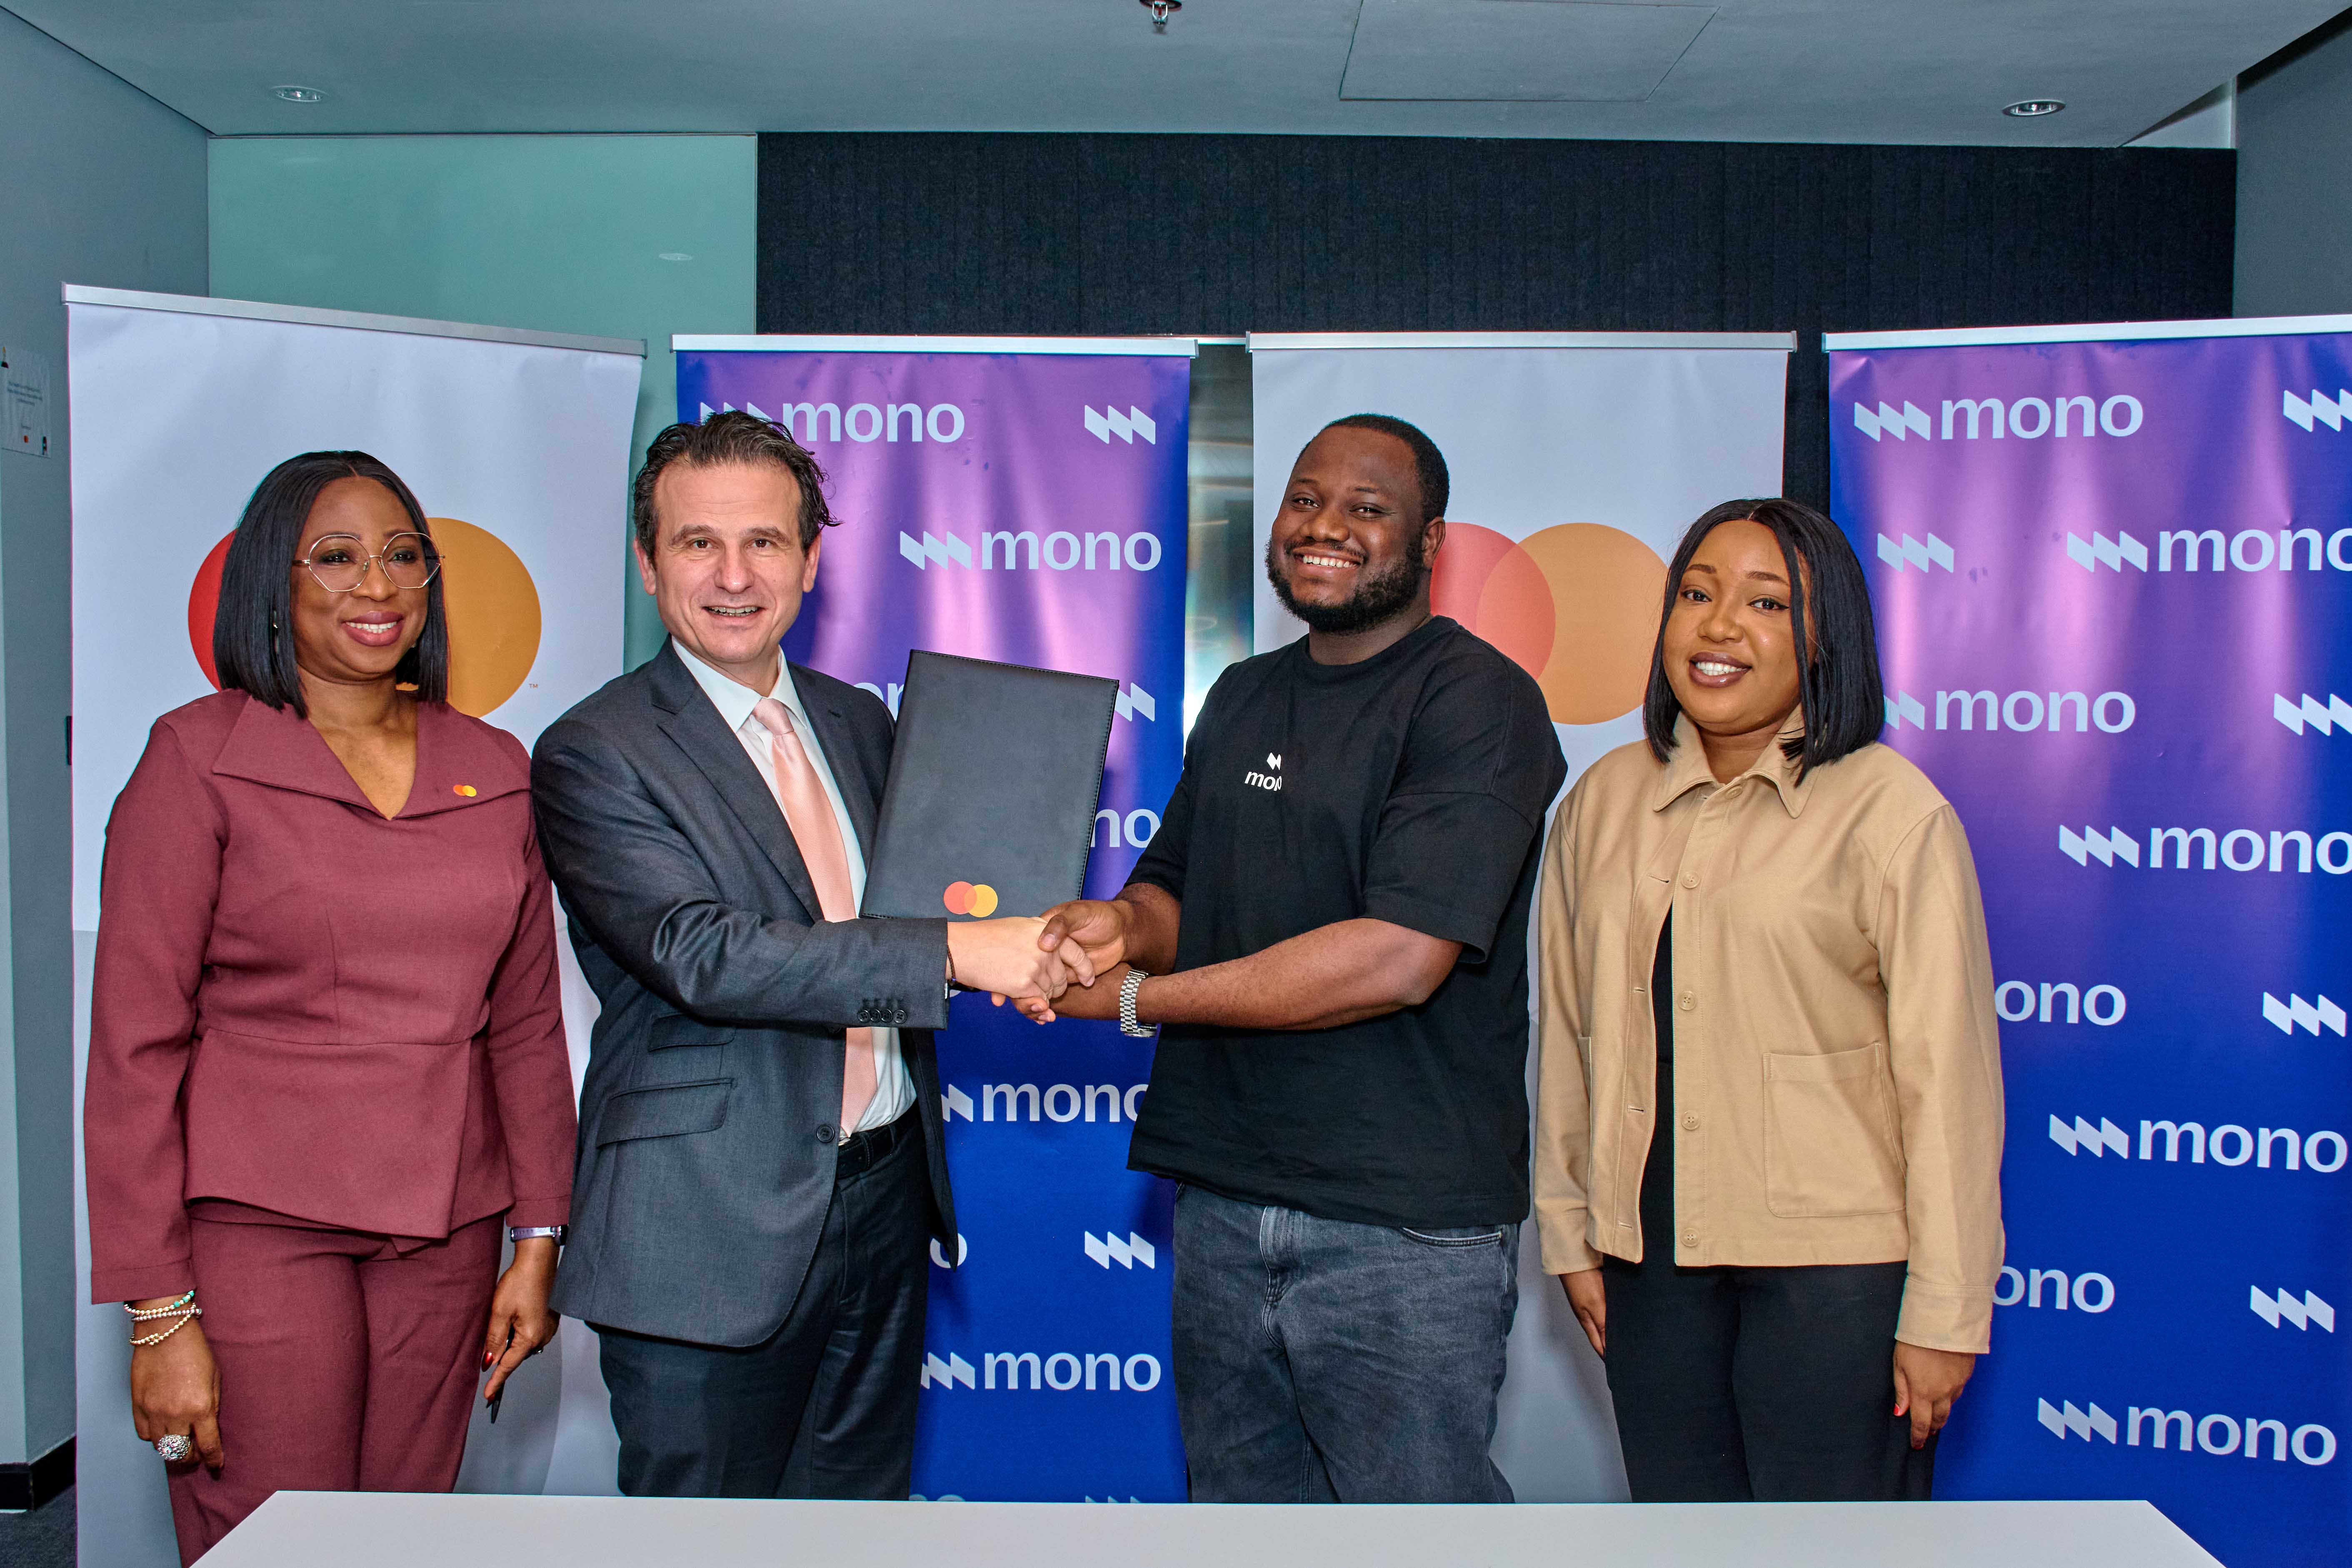 L-R: Folasade Femi-Lawal, Country Manager, West Africa, Mastercard; Dimitrios Dosis, President of Eastern Europe, Middle East, and Africa (EEMEA), Mastercard; Abdul Hassan, CEO and co-founder, Mono, and Bridget Ogundijo, Head of Sales, Mono.